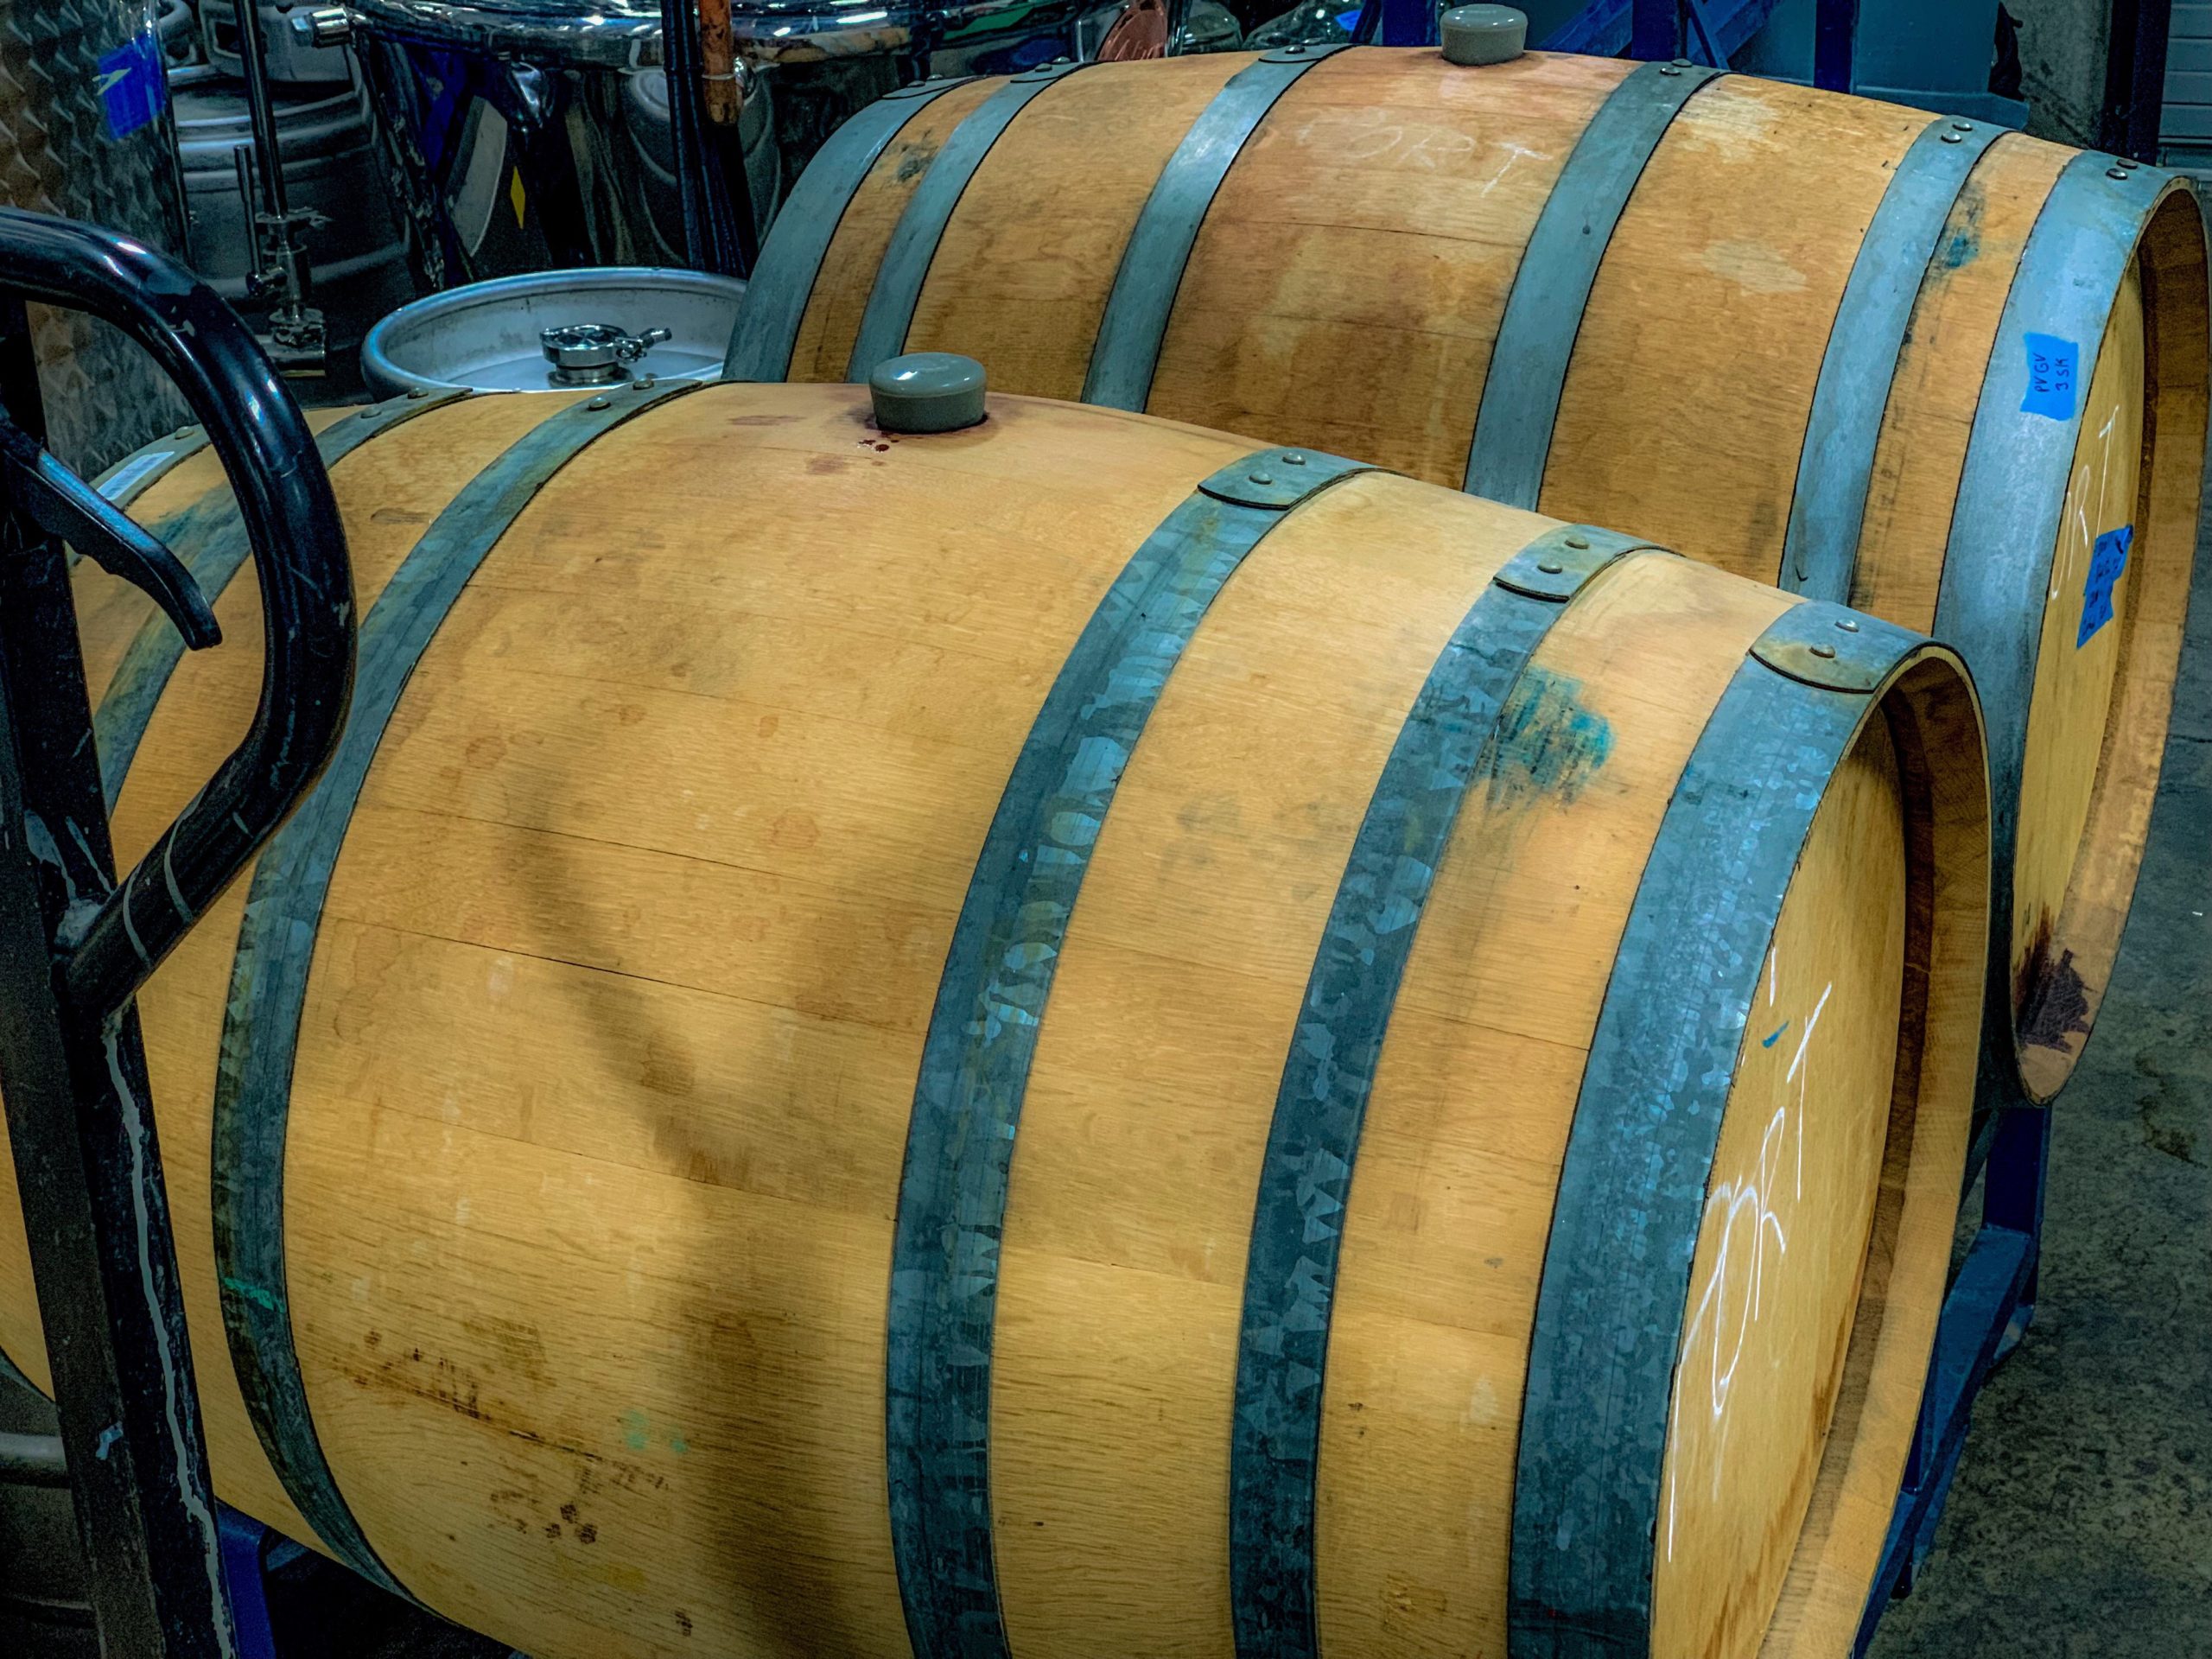 A picture of two oak barrels filled with our port wine showing therm getting ready for bottling